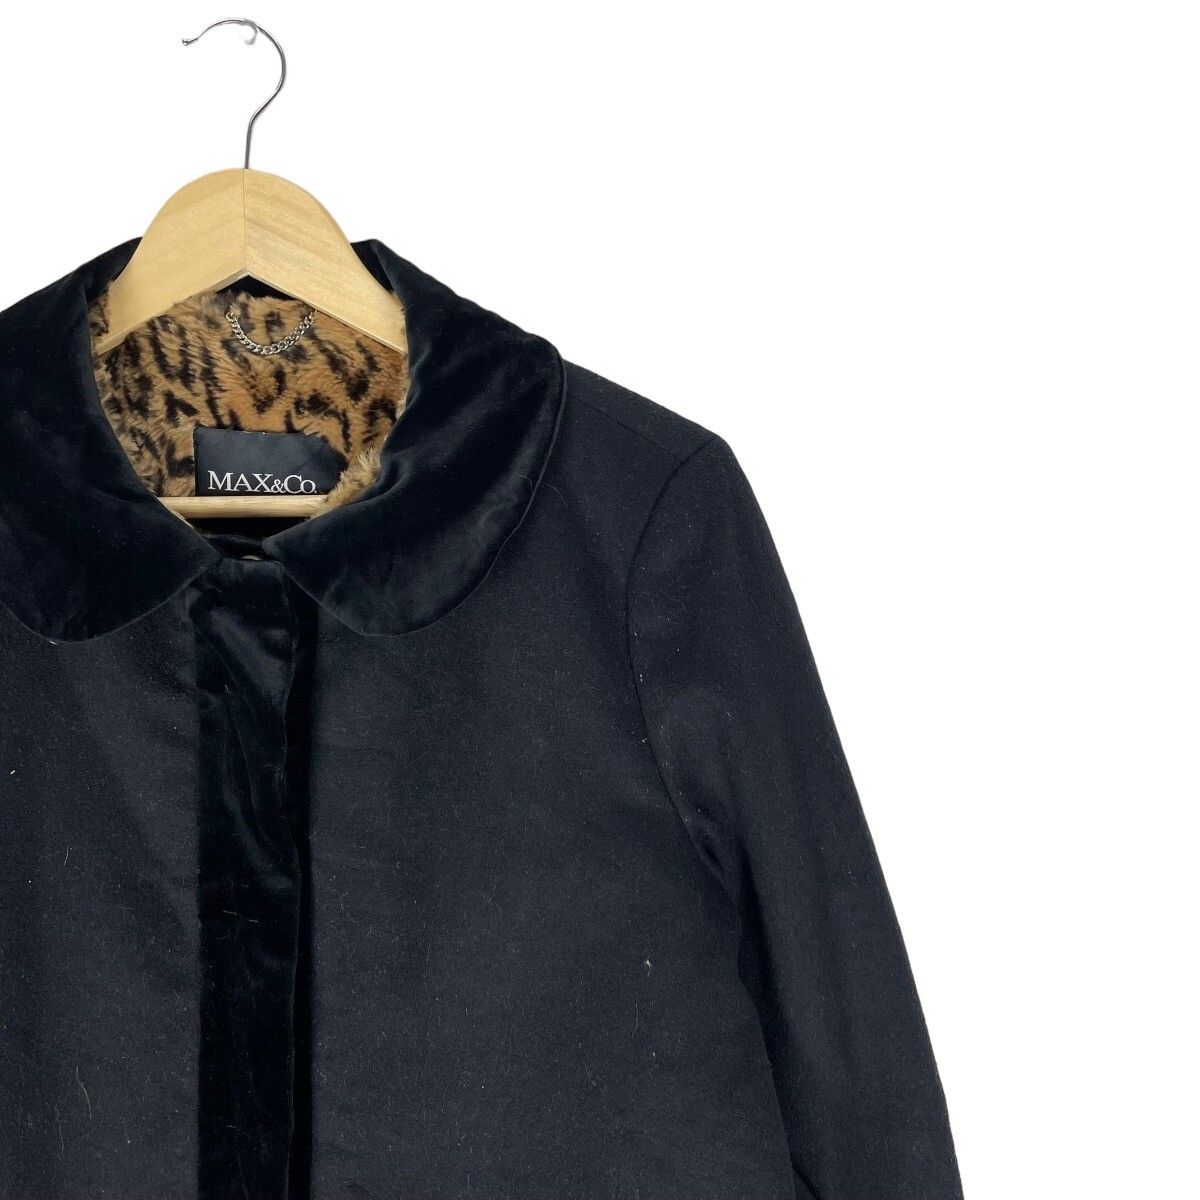 ☀️MAX CO LEOPARD INNER SNAP BUTTON COAT JACKET - 4